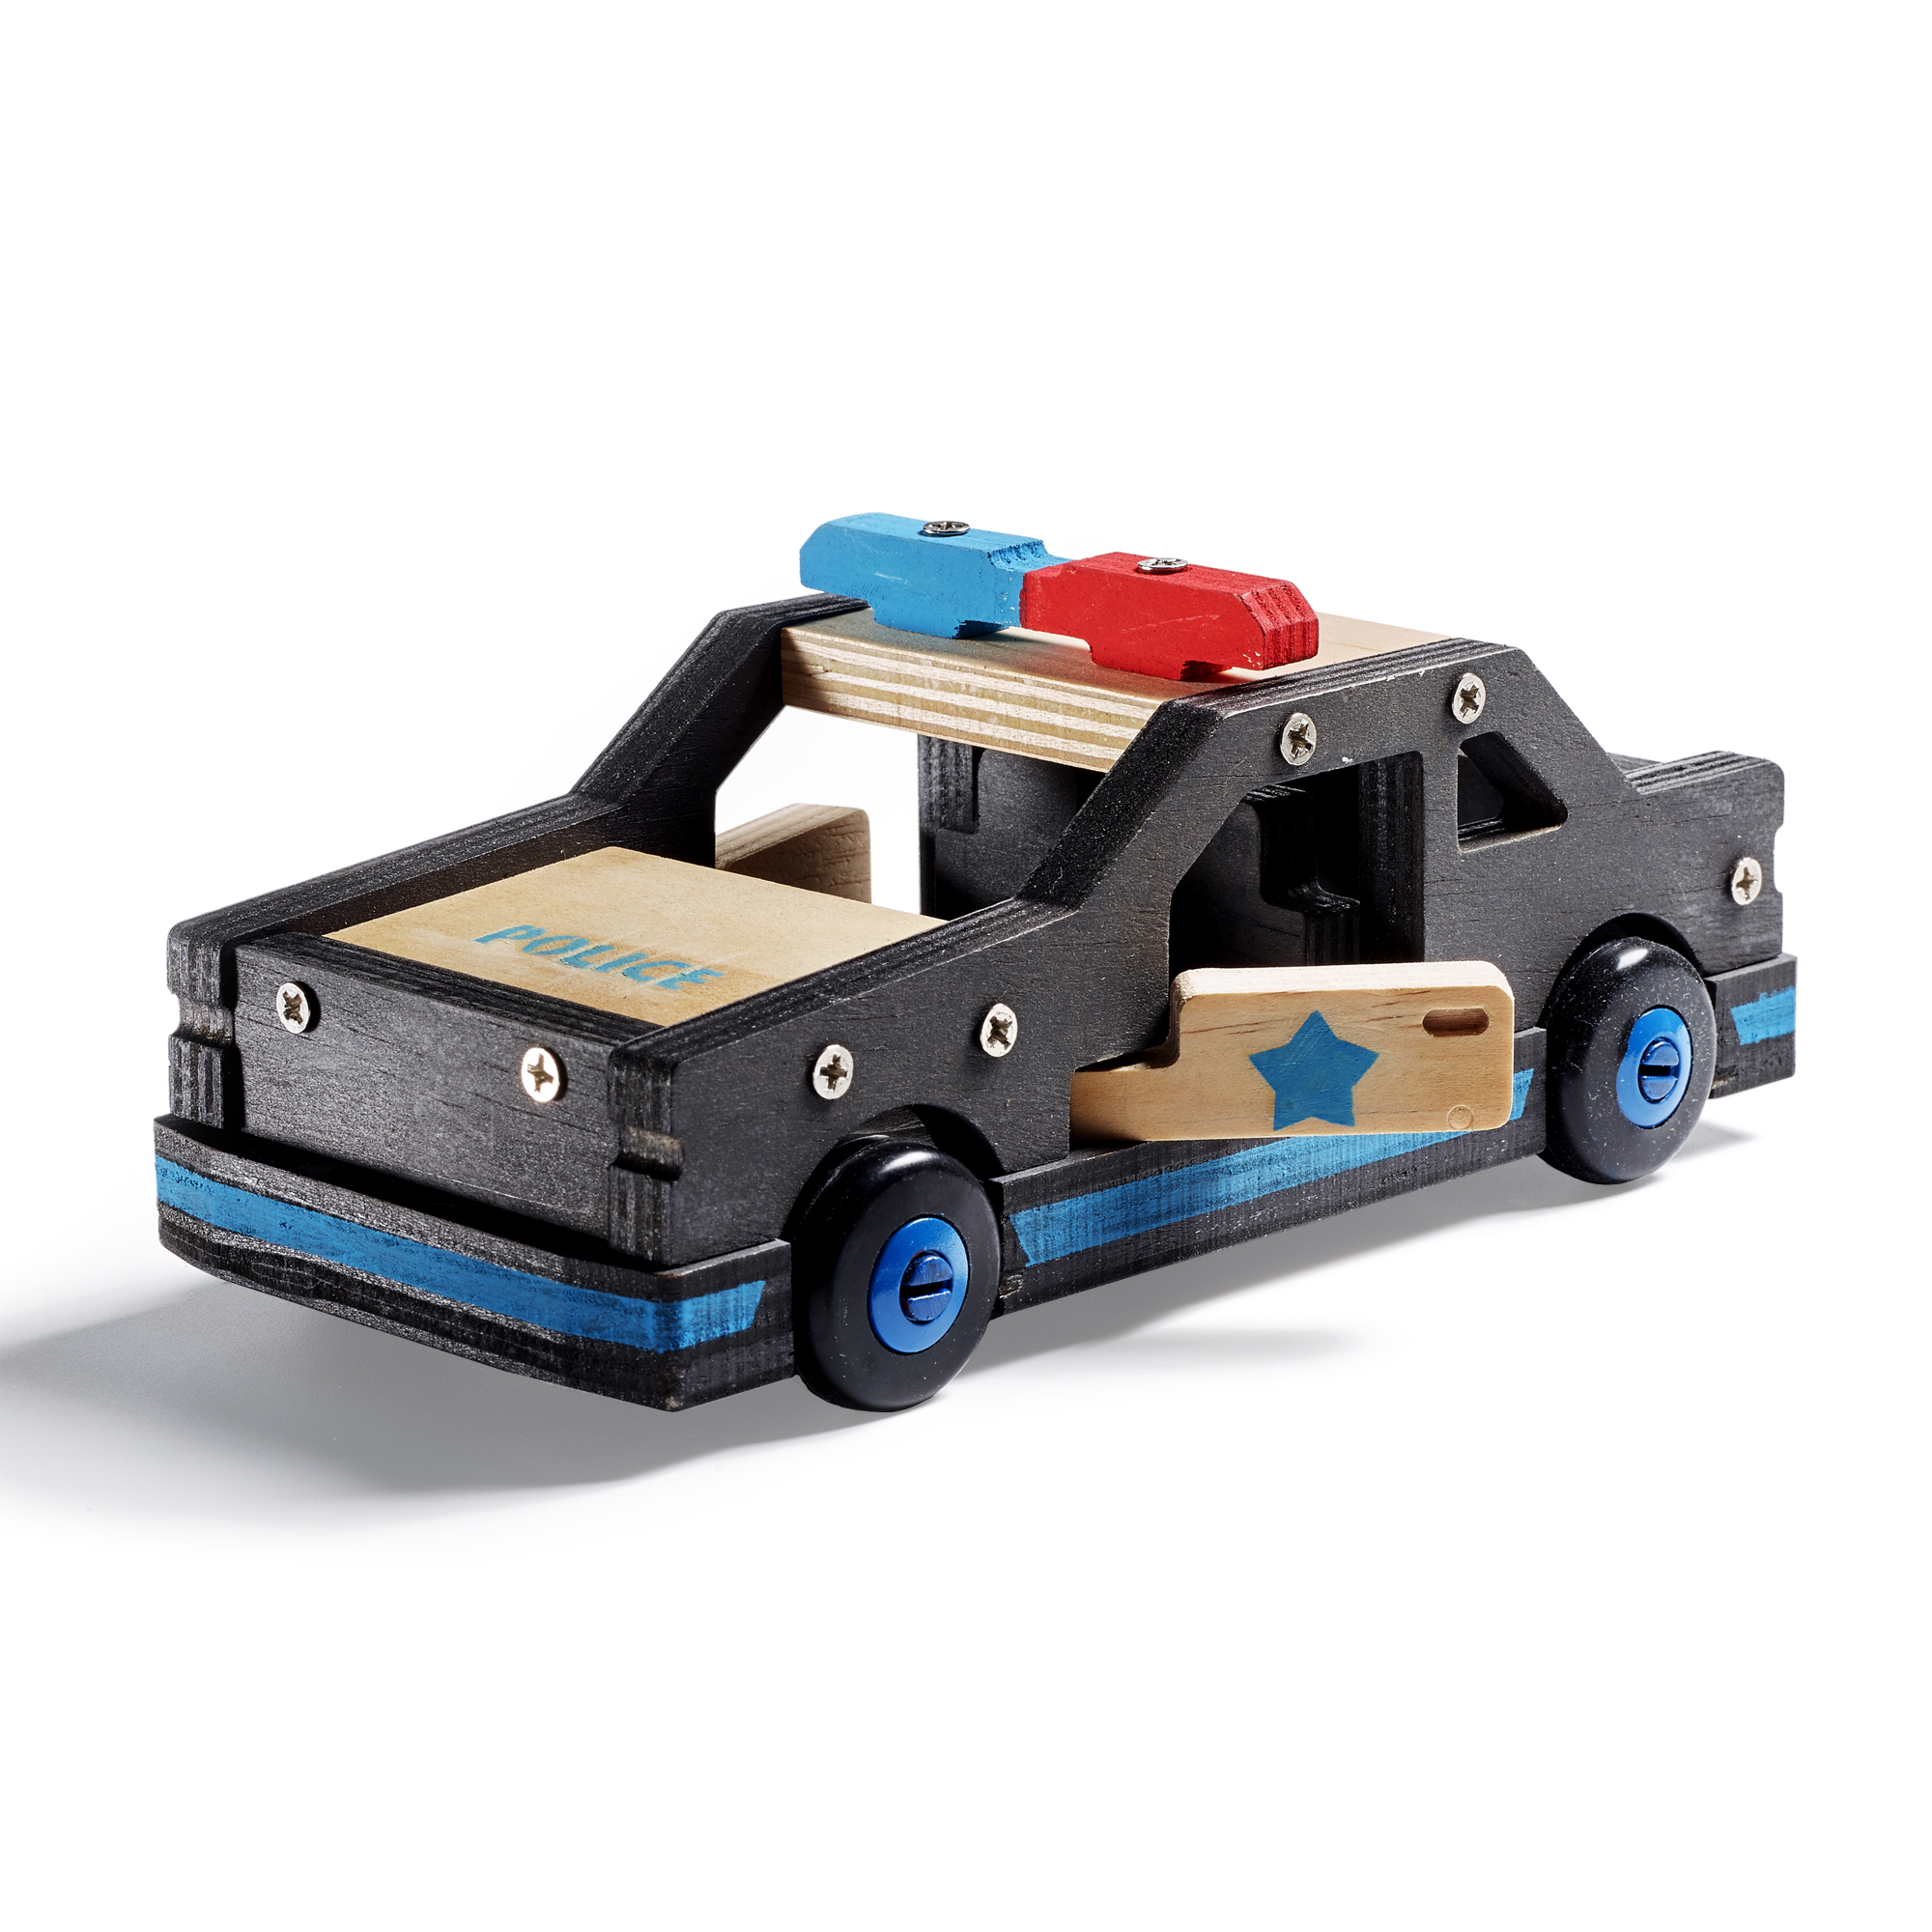 Stanley Jr - Build your Own Police Car Kit - image 1 of 3